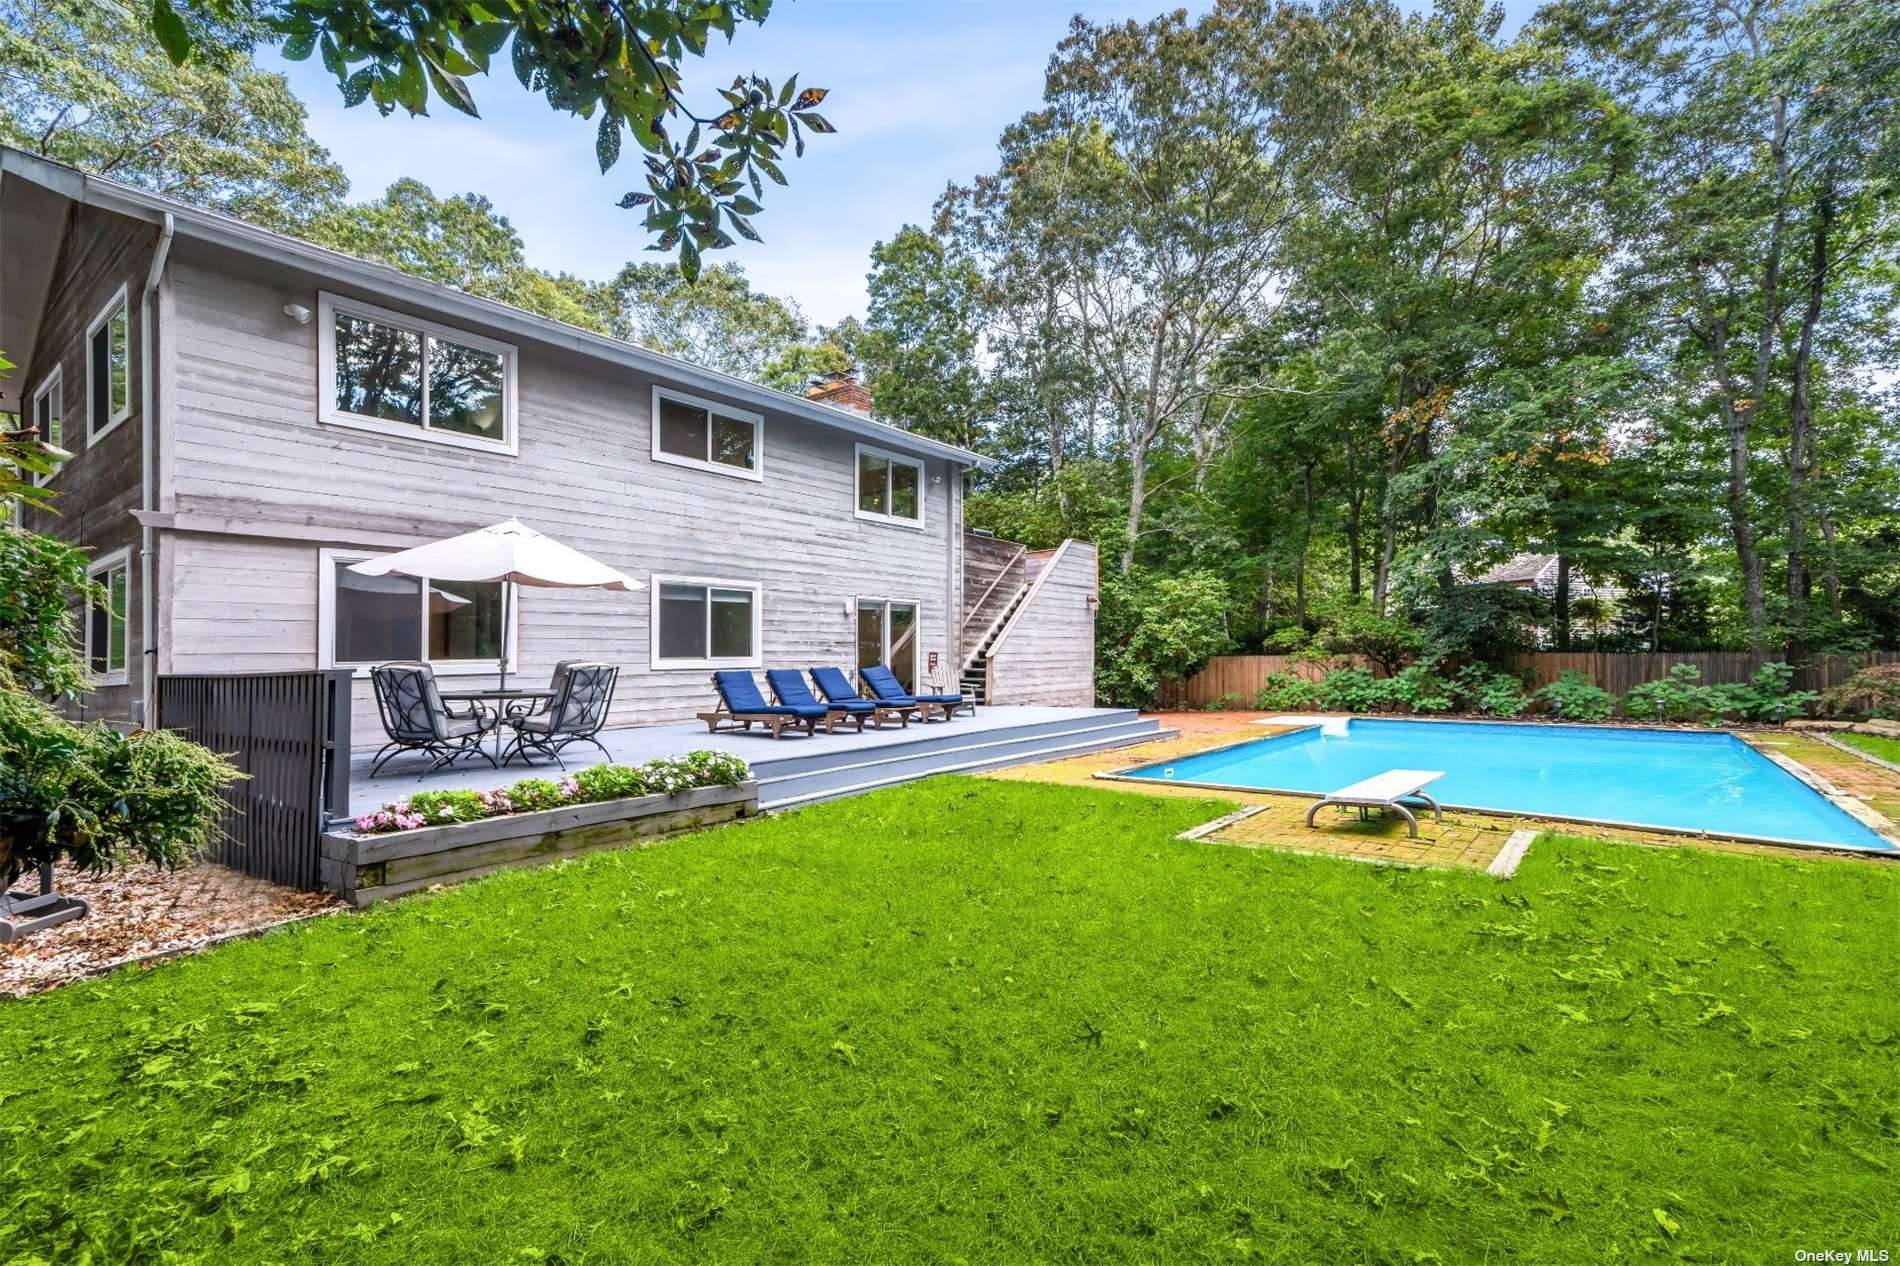 Rental Registration 23 1199 Step into the tranquility of 4 Underwood Drive, located in the exclusive Clearwater Beach community in East Hampton.